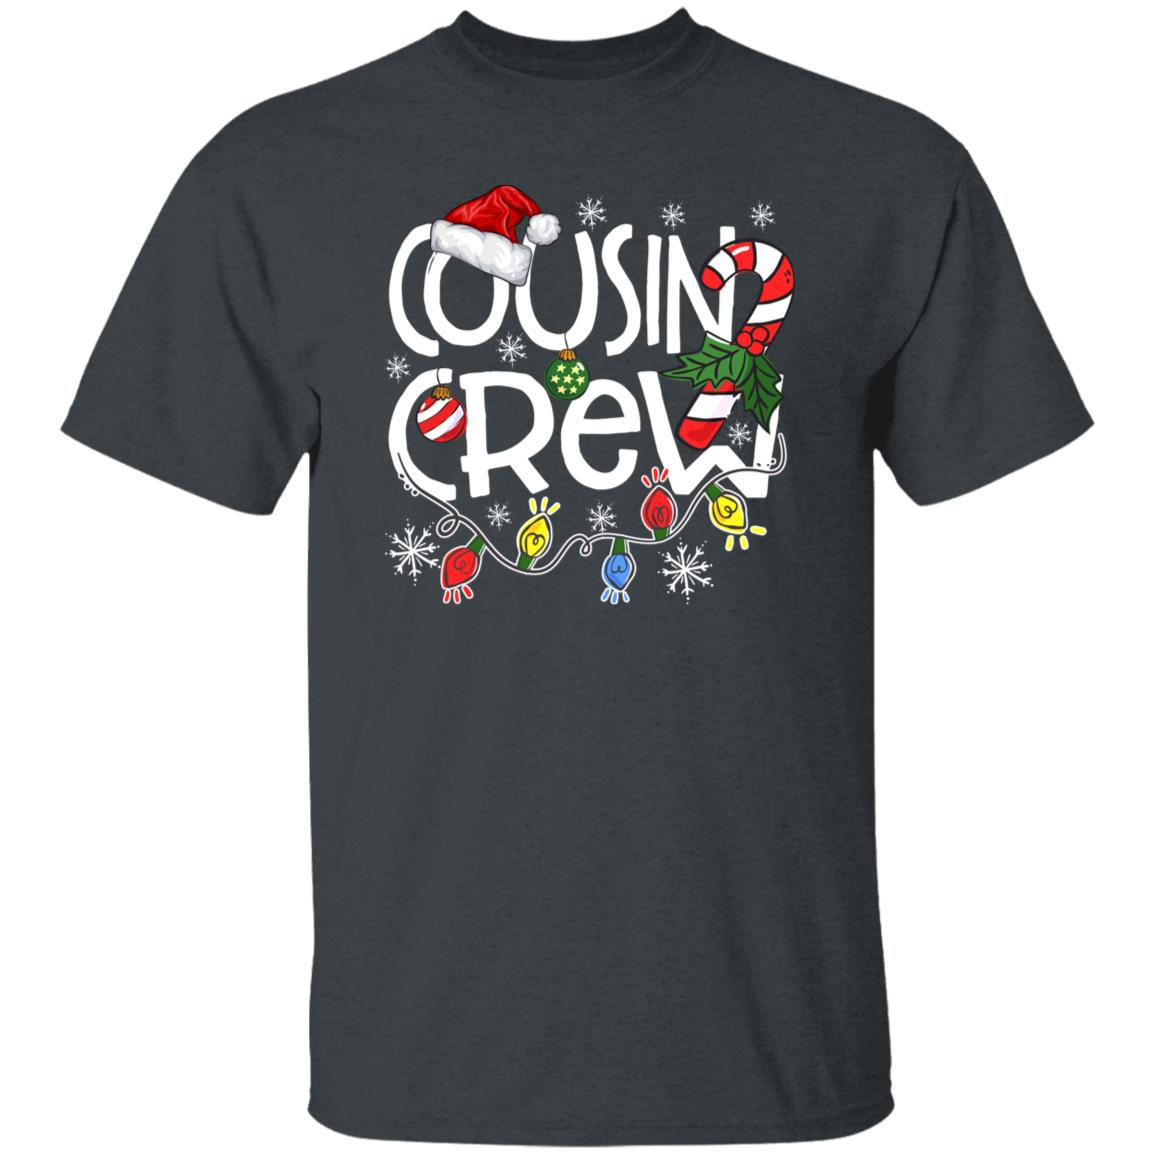 Cool Cousin Crew Christmas Unisex Shirt Cousin squad tee Black Dark Heather-Family-Gift-Planet